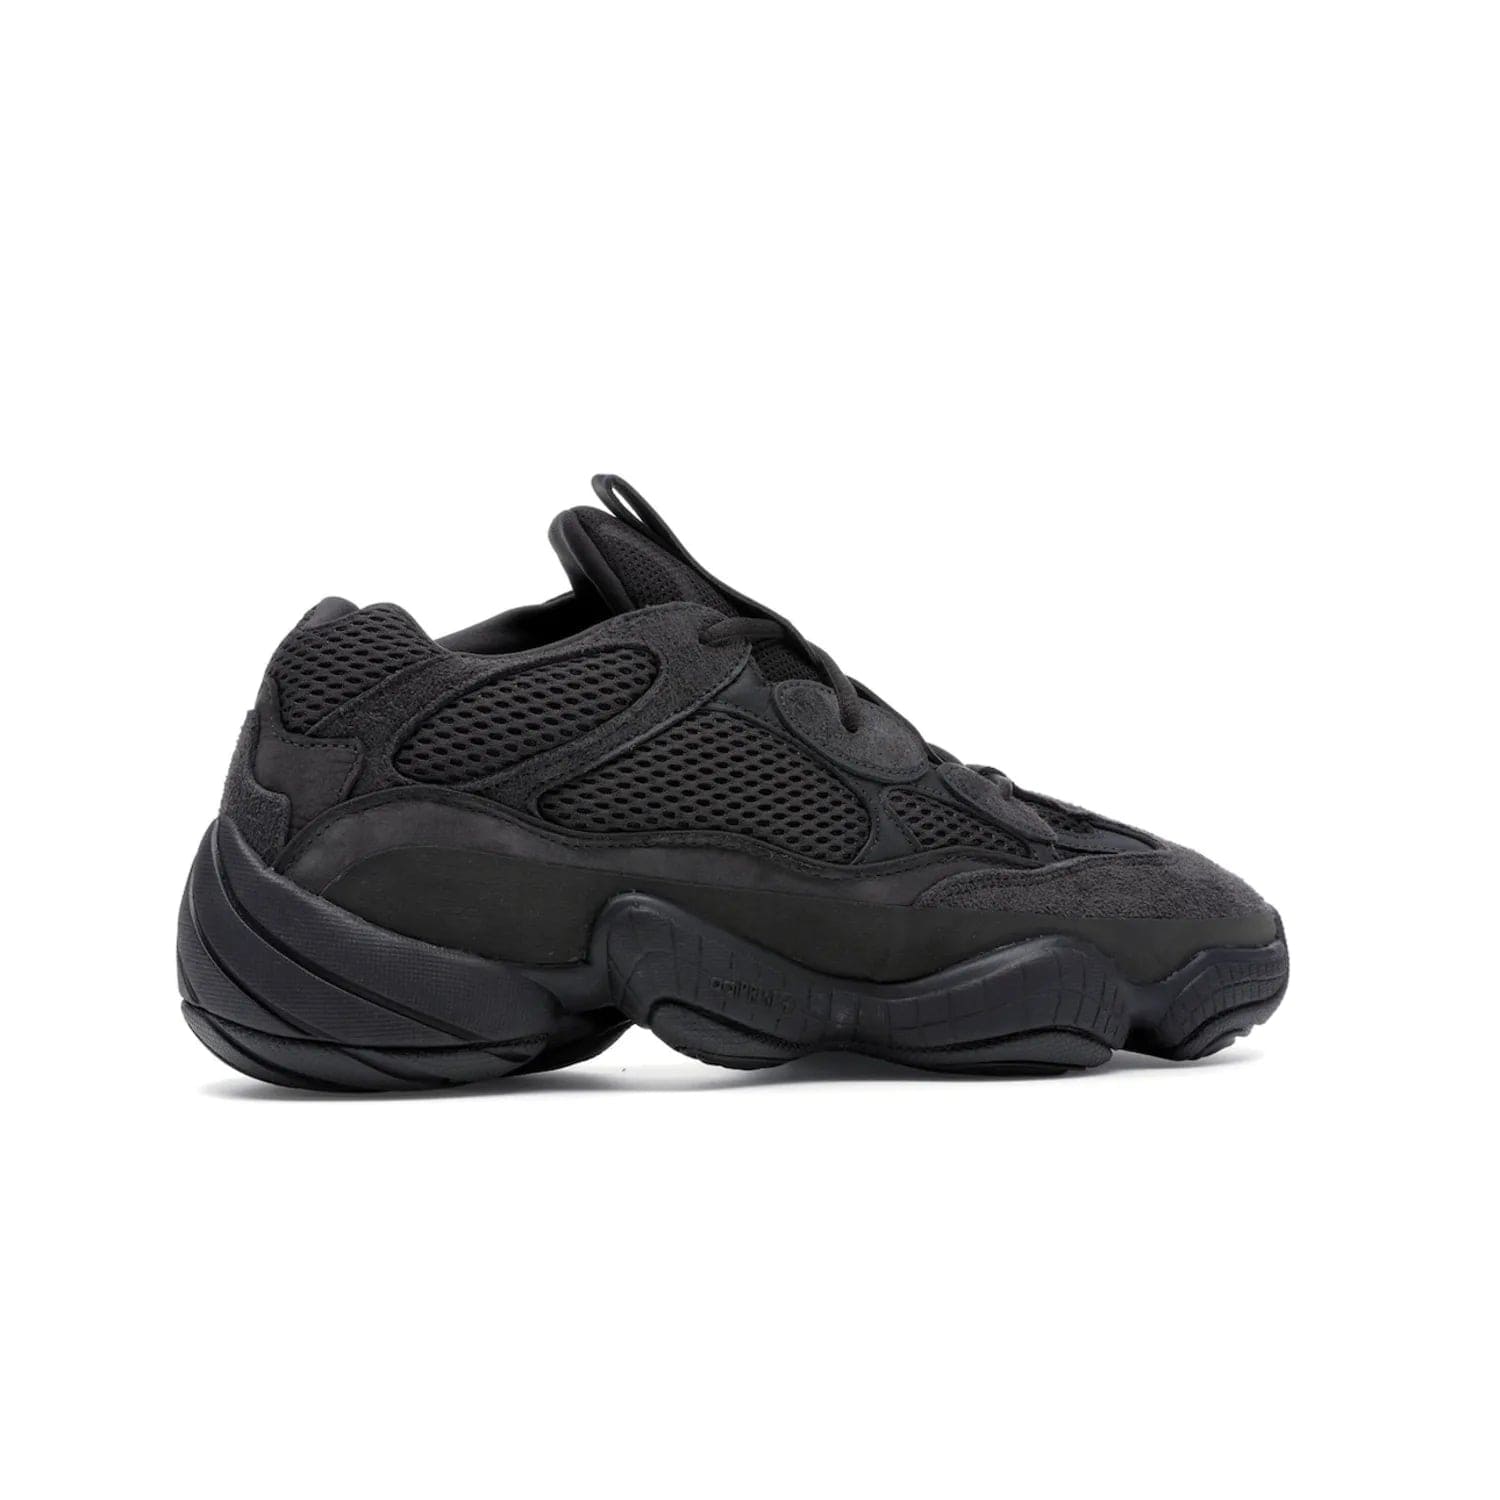 adidas Yeezy 500 Utility Black - Image 35 - Only at www.BallersClubKickz.com - Iconic adidas Yeezy 500 Utility Black in All-Black colorway. Durable black mesh and suede upper with adiPRENE® sole delivers comfort and support. Be unstoppable with the Yeezy 500 Utility Black. Released July 2018.